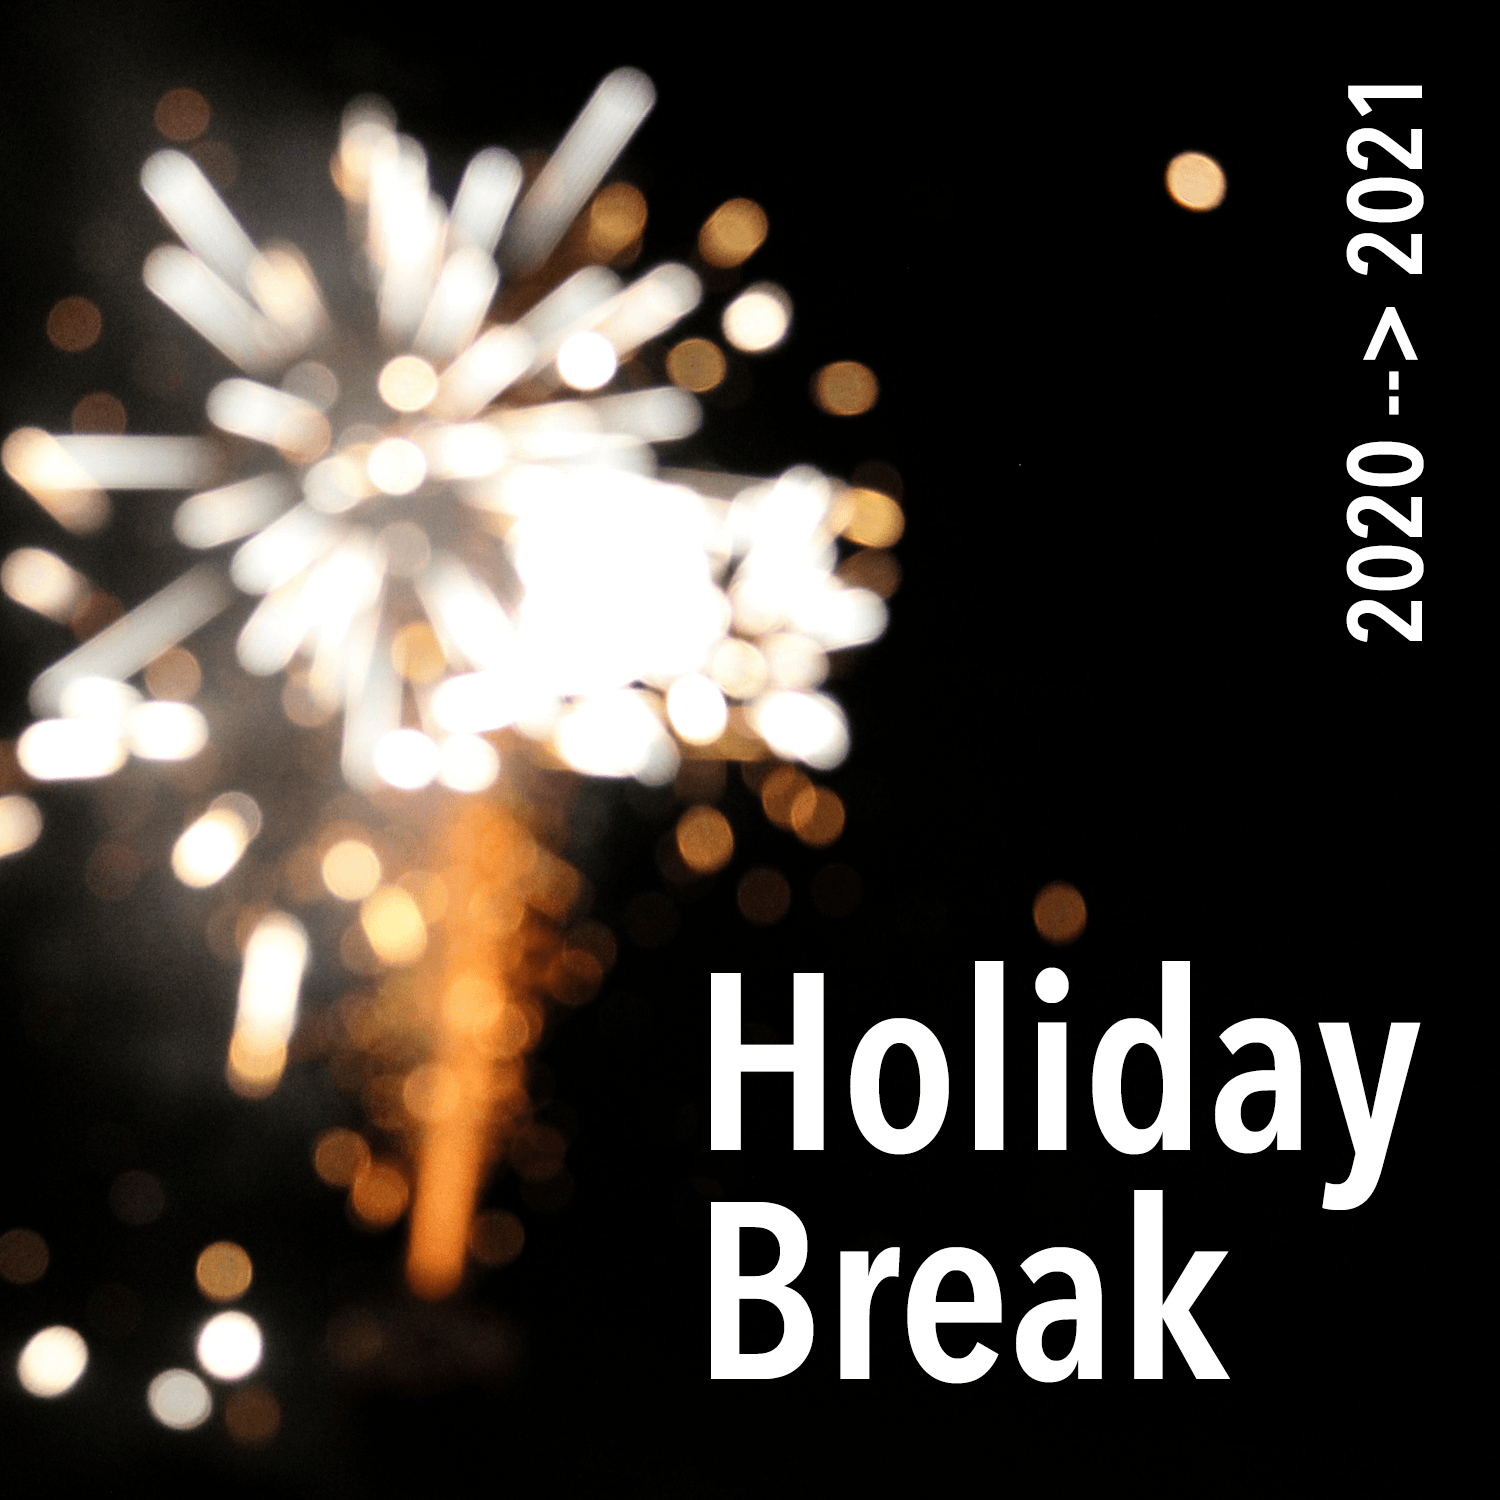 Holiday Break hours, Photo by Siora Photography, Unsplashed